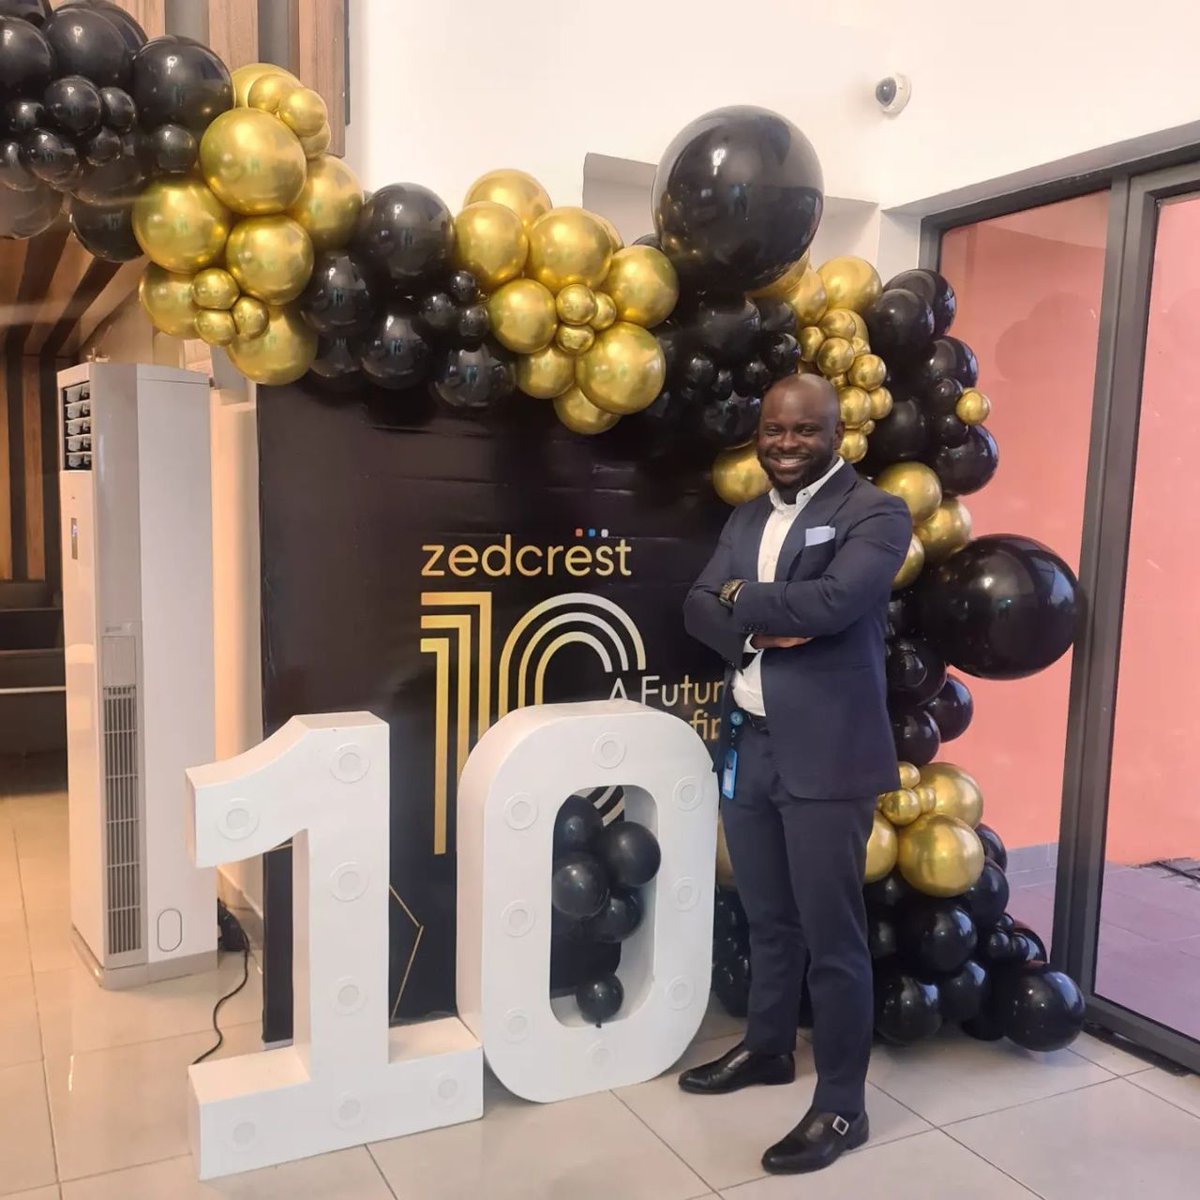 Celebrating #ZedcrestAt10

10 years of impact, providing customer-centric financial solutions through user-
friendly technological innovations.

Welcome to #AFutureRedefined

#zedvance 
#moneysolutions 
#moneypal 
#moneypalbyzedvance
#zedcrestcapital 
#zedcrestcapital